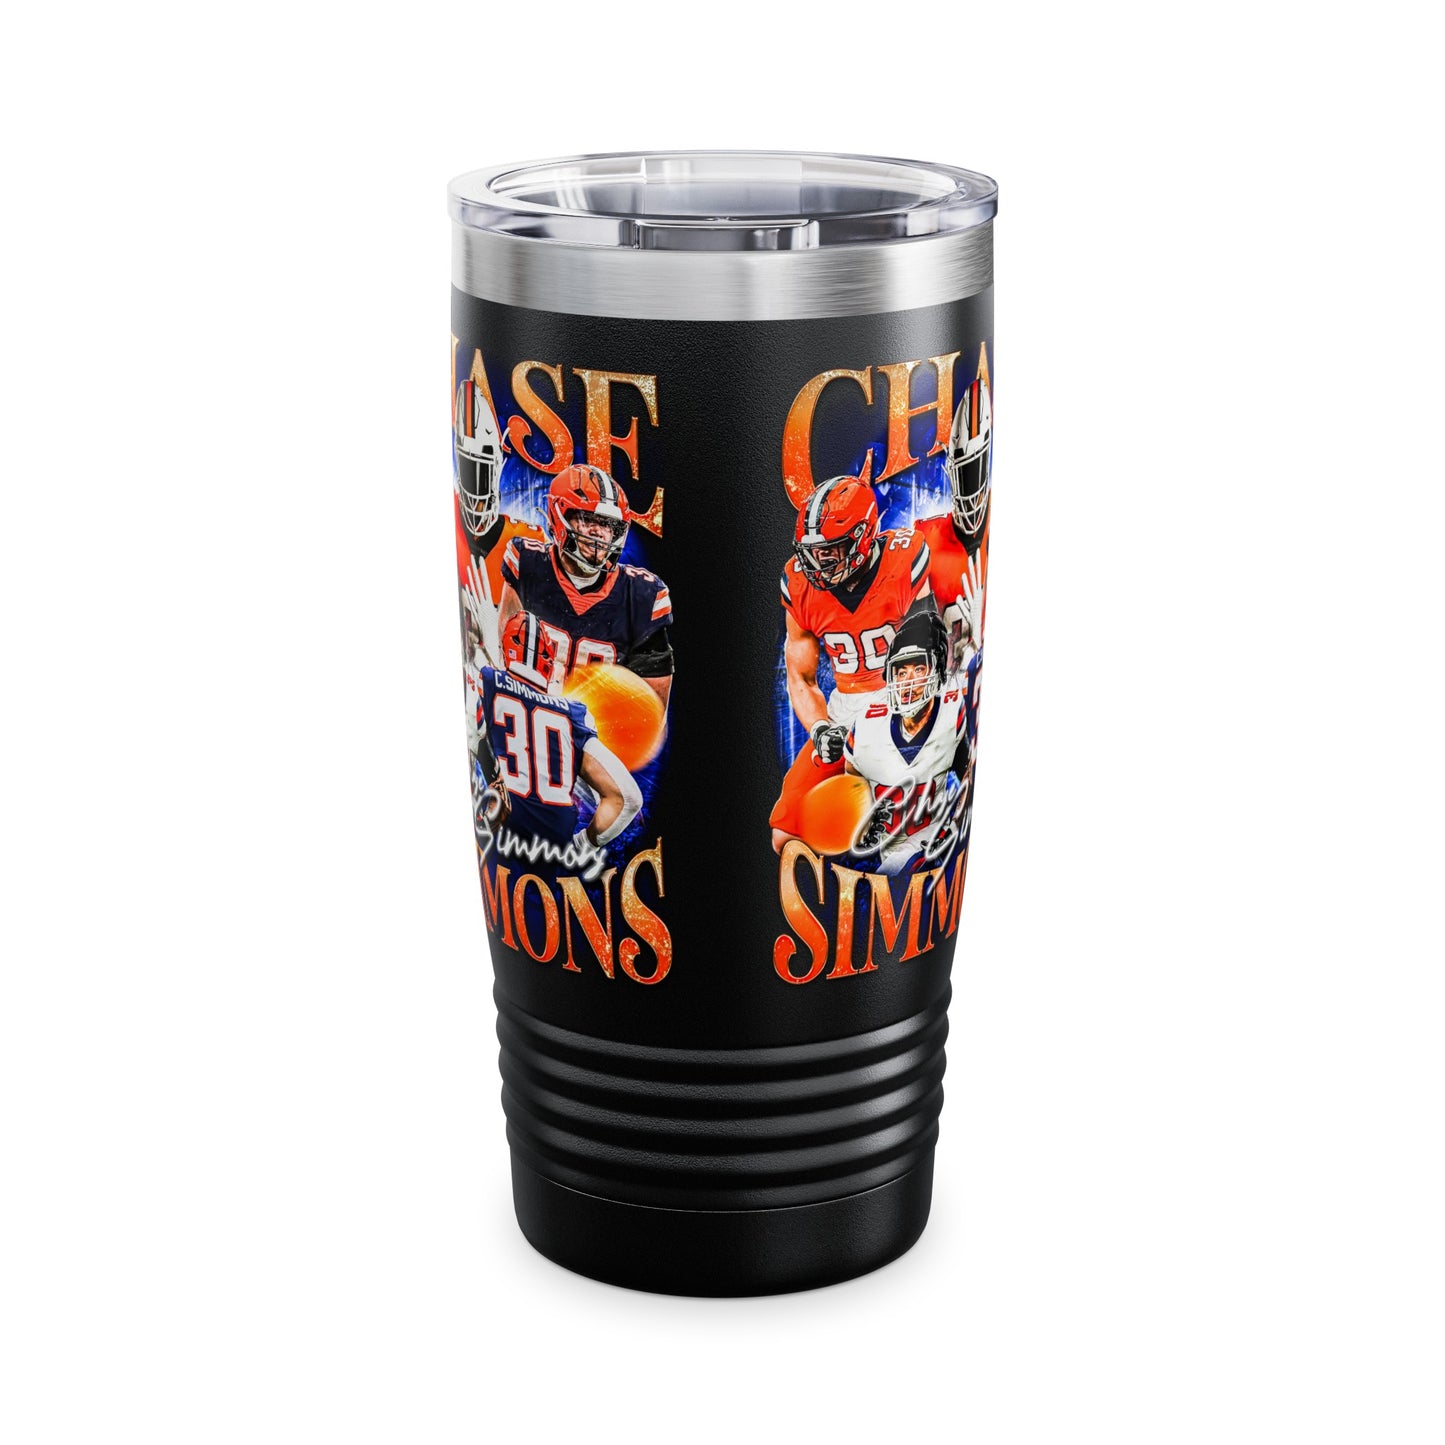 CHASE SIMMONS STAINLESS STEEL TUMBLER